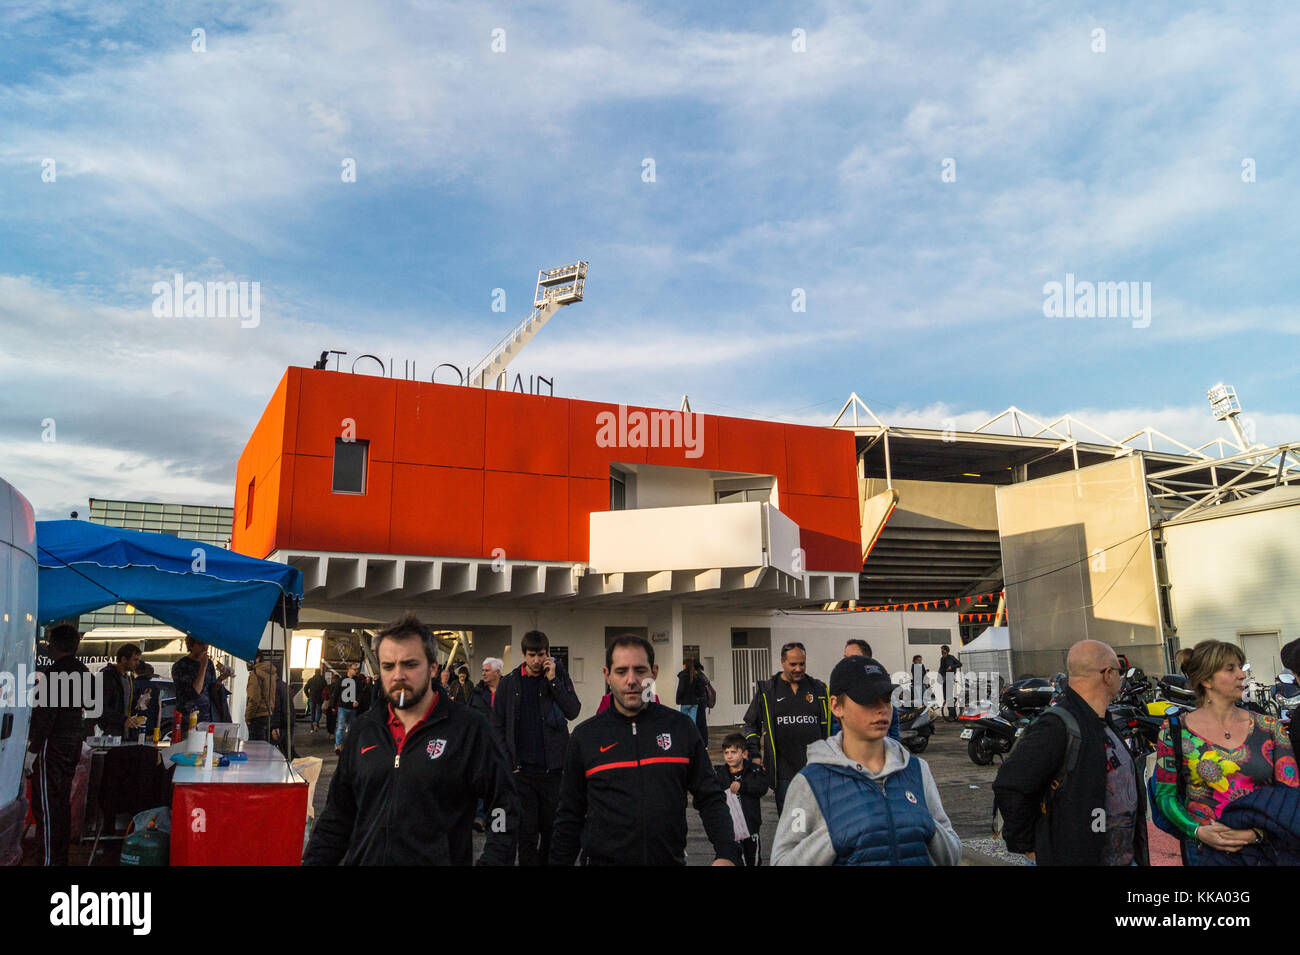 Spectators leaving a rugby match, Ernest Wallon stadium, home ground of Stade Toulousain rugby union team, Toulouse, Haute-Garonne, Occitanie, France Stock Photo